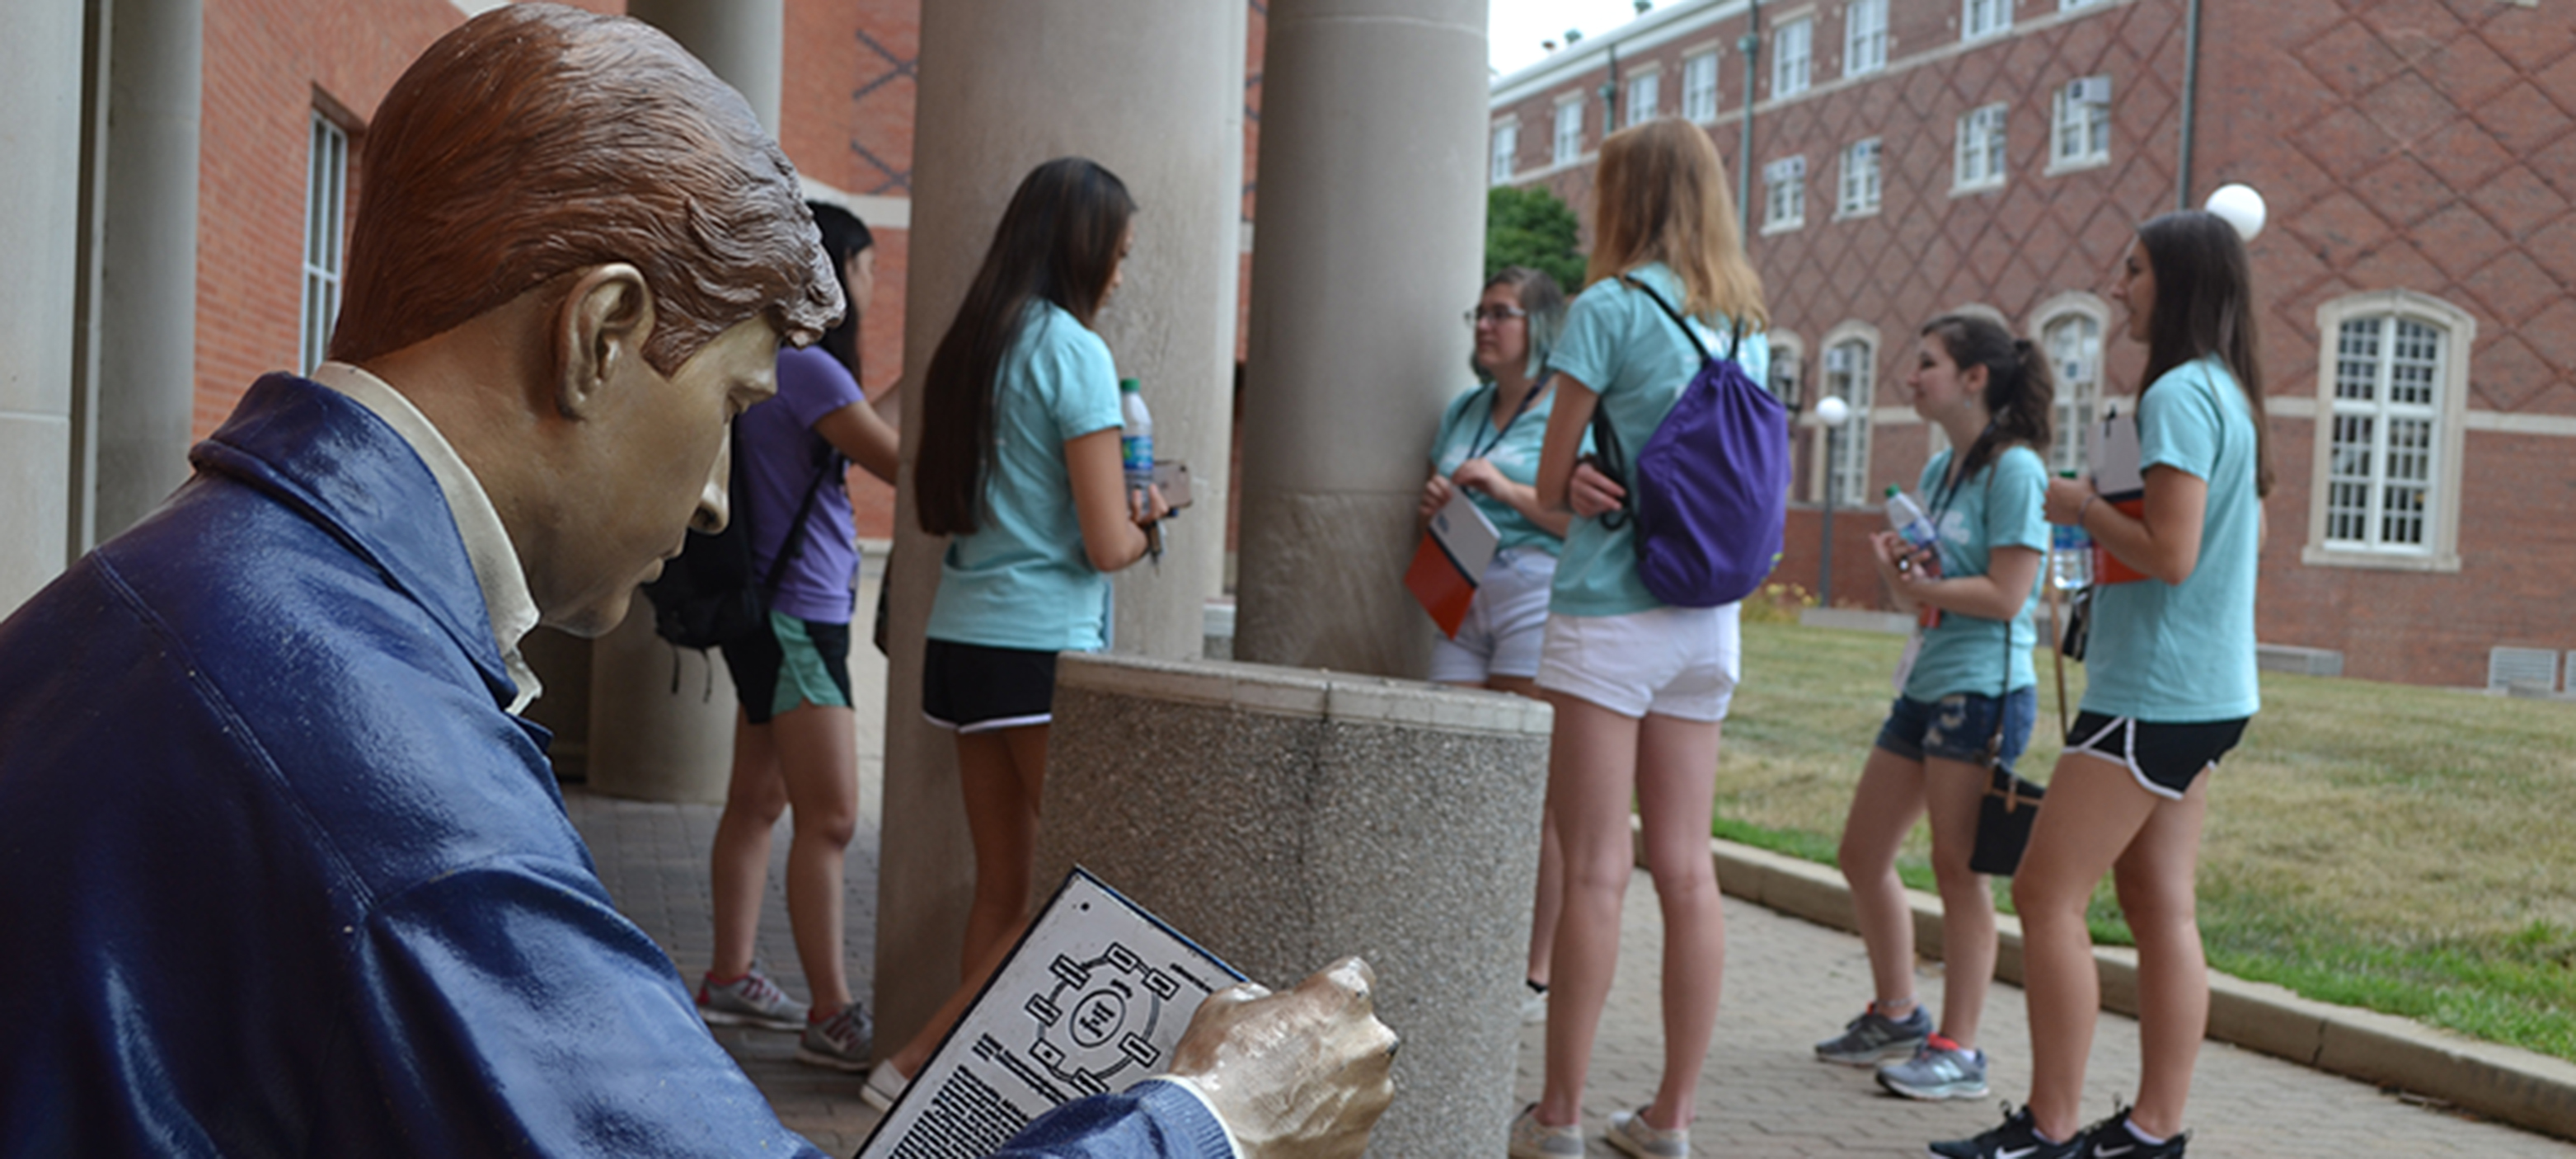 At the fall 2019 WIE Orientation, a group of female engineering freshmen chat on the south portico of Grainger Library as Grainger Bob looks on.